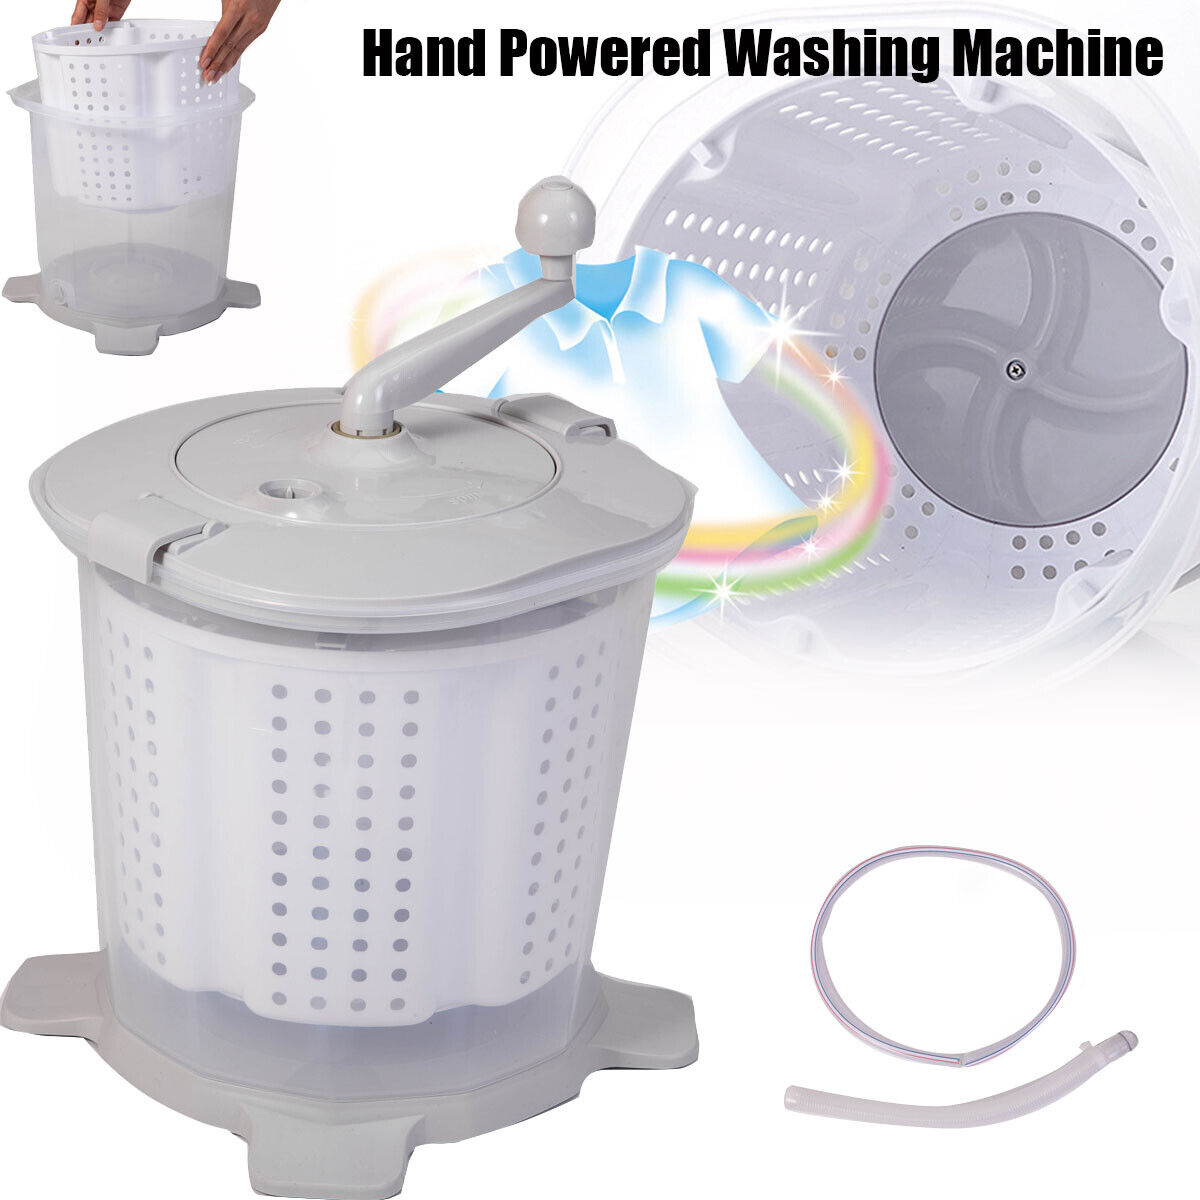 Eventyrer Avenue Faciliteter Portable Hand Powered Washing Machine Mini Manual Washer and Spin Dryer  Combo | eBay